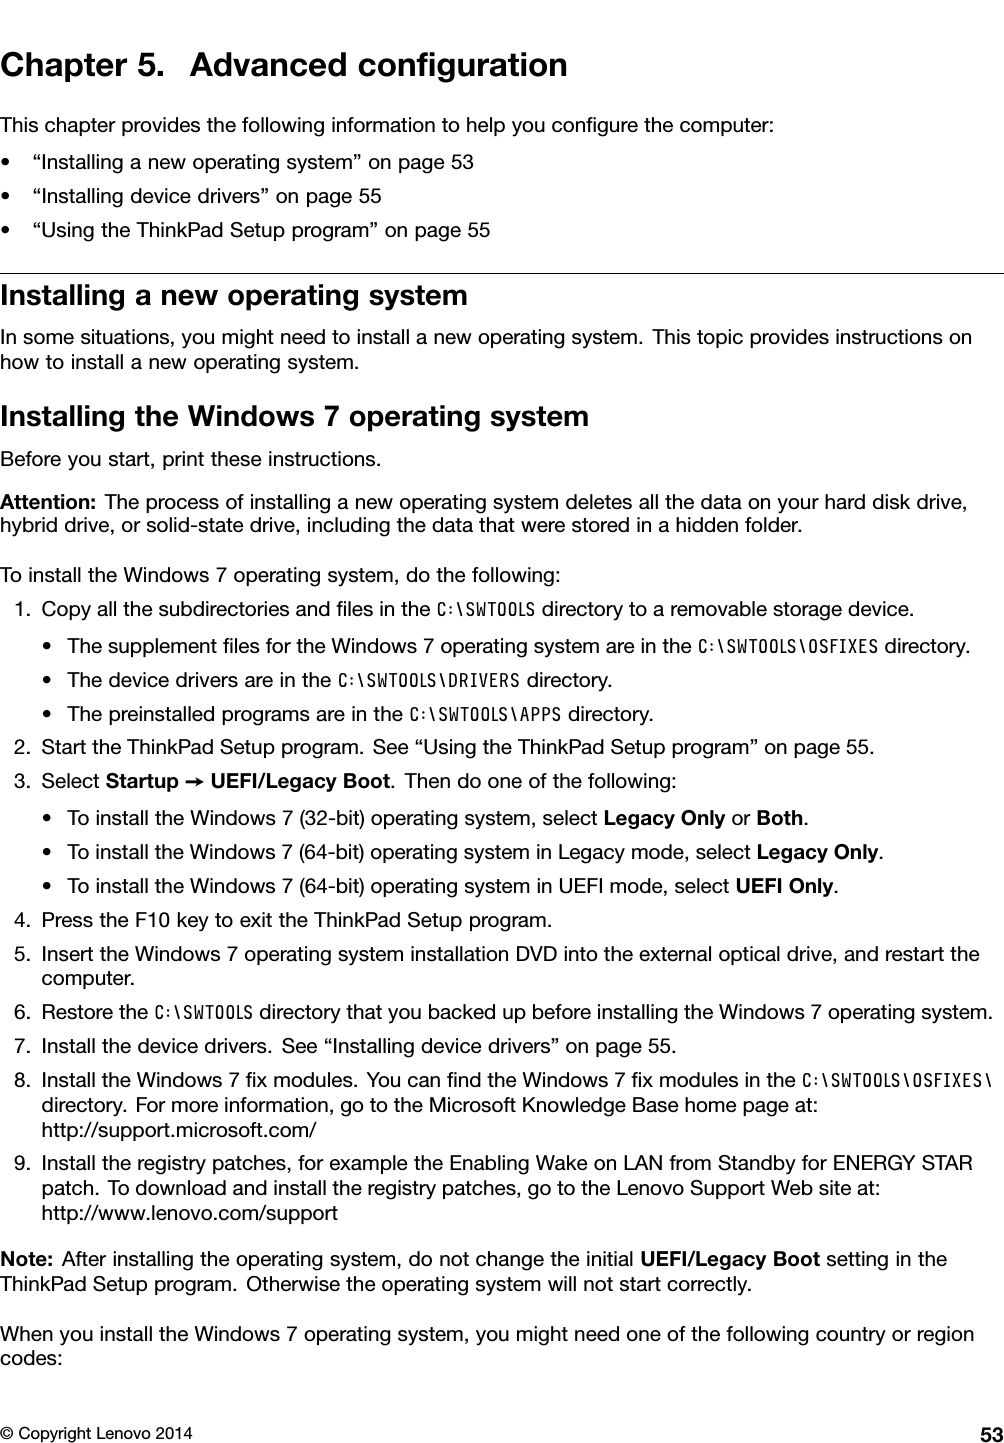 Chapter 5. Advanced conﬁgurationThis chapter provides the following information to help you conﬁgure the computer:• “Installing a new operating system” on page 53• “Installing device drivers” on page 55• “Using the ThinkPad Setup program” on page 55Installing a new operating systemIn some situations, you might need to install a new operating system. This topic provides instructions onhow to install a new operating system.Installing the Windows 7 operating systemBefore you start, print these instructions.Attention: The process of installing a new operating system deletes all the data on your hard disk drive,hybrid drive, or solid-state drive, including the data that were stored in a hidden folder.To install the Windows 7 operating system, do the following:1. Copy all the subdirectories and ﬁles in the  directory to a removable storage device.• The supplement ﬁles for the Windows 7 operating system are in the  directory.• The device drivers are in the  directory.• The preinstalled programs are in the  directory.2. Start the ThinkPad Setup program. See “Using the ThinkPad Setup program” on page 55.3. Select Startup ➙UEFI/Legacy Boot. Then do one of the following:• To install the Windows 7 (32-bit) operating system, select Legacy Only or Both.• To install the Windows 7 (64-bit) operating system in Legacy mode, select Legacy Only.• To install the Windows 7 (64-bit) operating system in UEFI mode, select UEFI Only.4. Press the F10 key to exit the ThinkPad Setup program.5. Insert the Windows 7 operating system installation DVD into the external optical drive, and restart thecomputer.6. Restore the  directory that you backed up before installing the Windows 7 operating system.7. Install the device drivers. See “Installing device drivers” on page 55.8. Install the Windows 7 ﬁx modules. You can ﬁnd the Windows 7 ﬁx modules in the directory. For more information, go to the Microsoft Knowledge Base home page at:http://support.microsoft.com/9. Install the registry patches, for example the Enabling Wake on LAN from Standby for ENERGY STARpatch. To download and install the registry patches, go to the Lenovo Support Web site at:http://www.lenovo.com/supportNote: After installing the operating system, do not change the initial UEFI/Legacy Boot setting in theThinkPad Setup program. Otherwise the operating system will not start correctly.When you install the Windows 7 operating system, you might need one of the following country or regioncodes:© Copyright Lenovo 2014 53